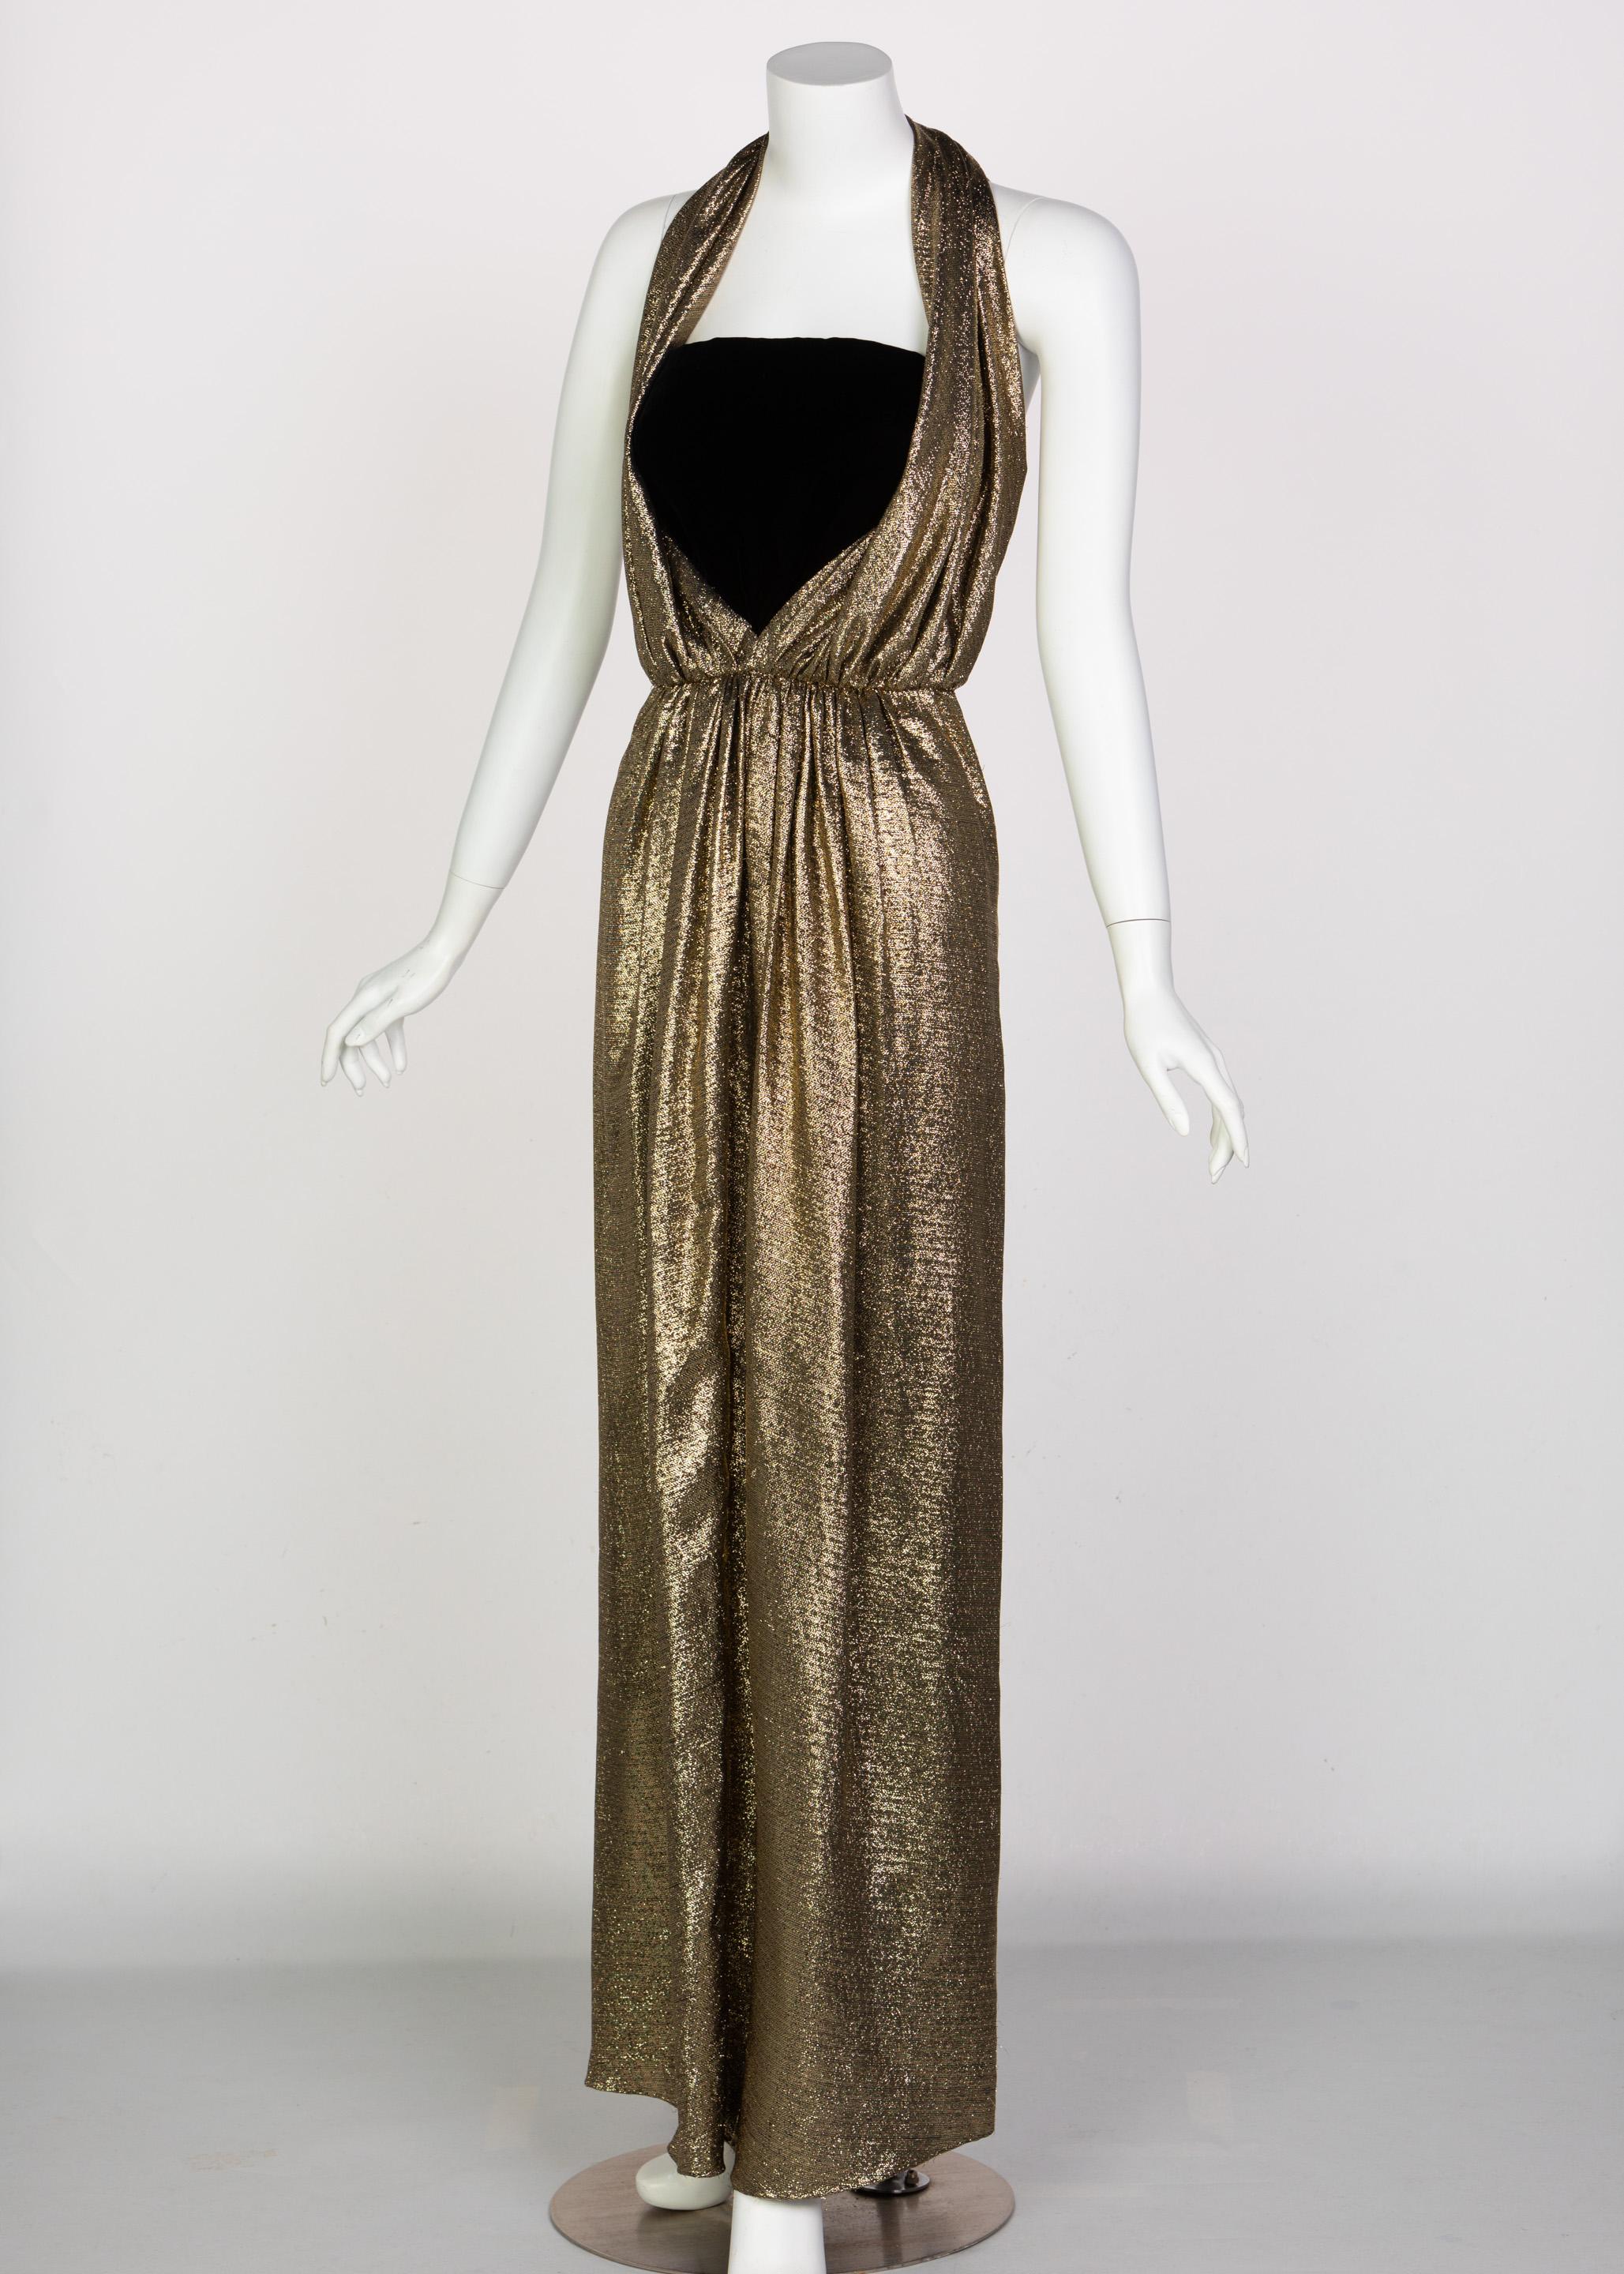 Before there was Halston, there was Bill Blass as the epitome of American style. Blass’ rise around the 1940s led him to be one of the most prominent women’s designers for multiple brands such as Anne Klein and Anna Miller. Blass’ reputation and